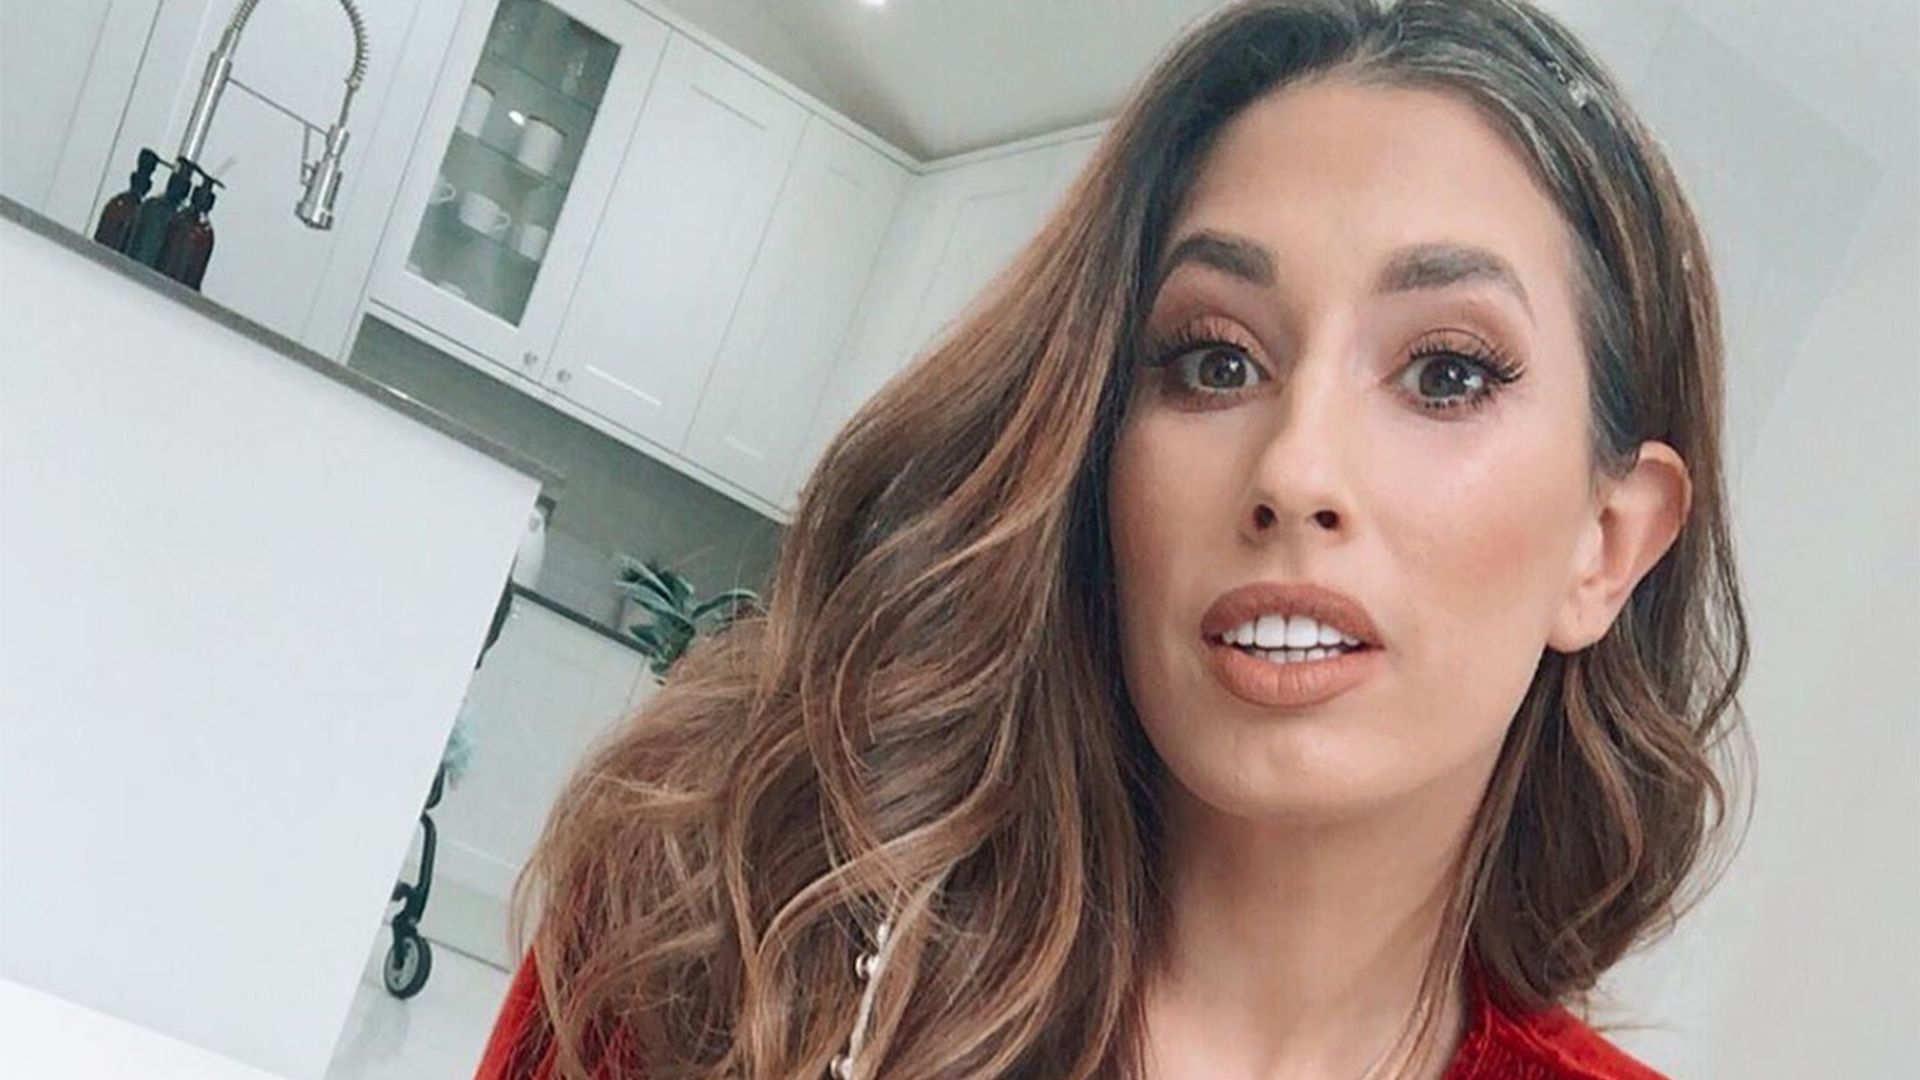 9 of Stacey Solomon's best home DIY projects to keep you occupied during lockdown